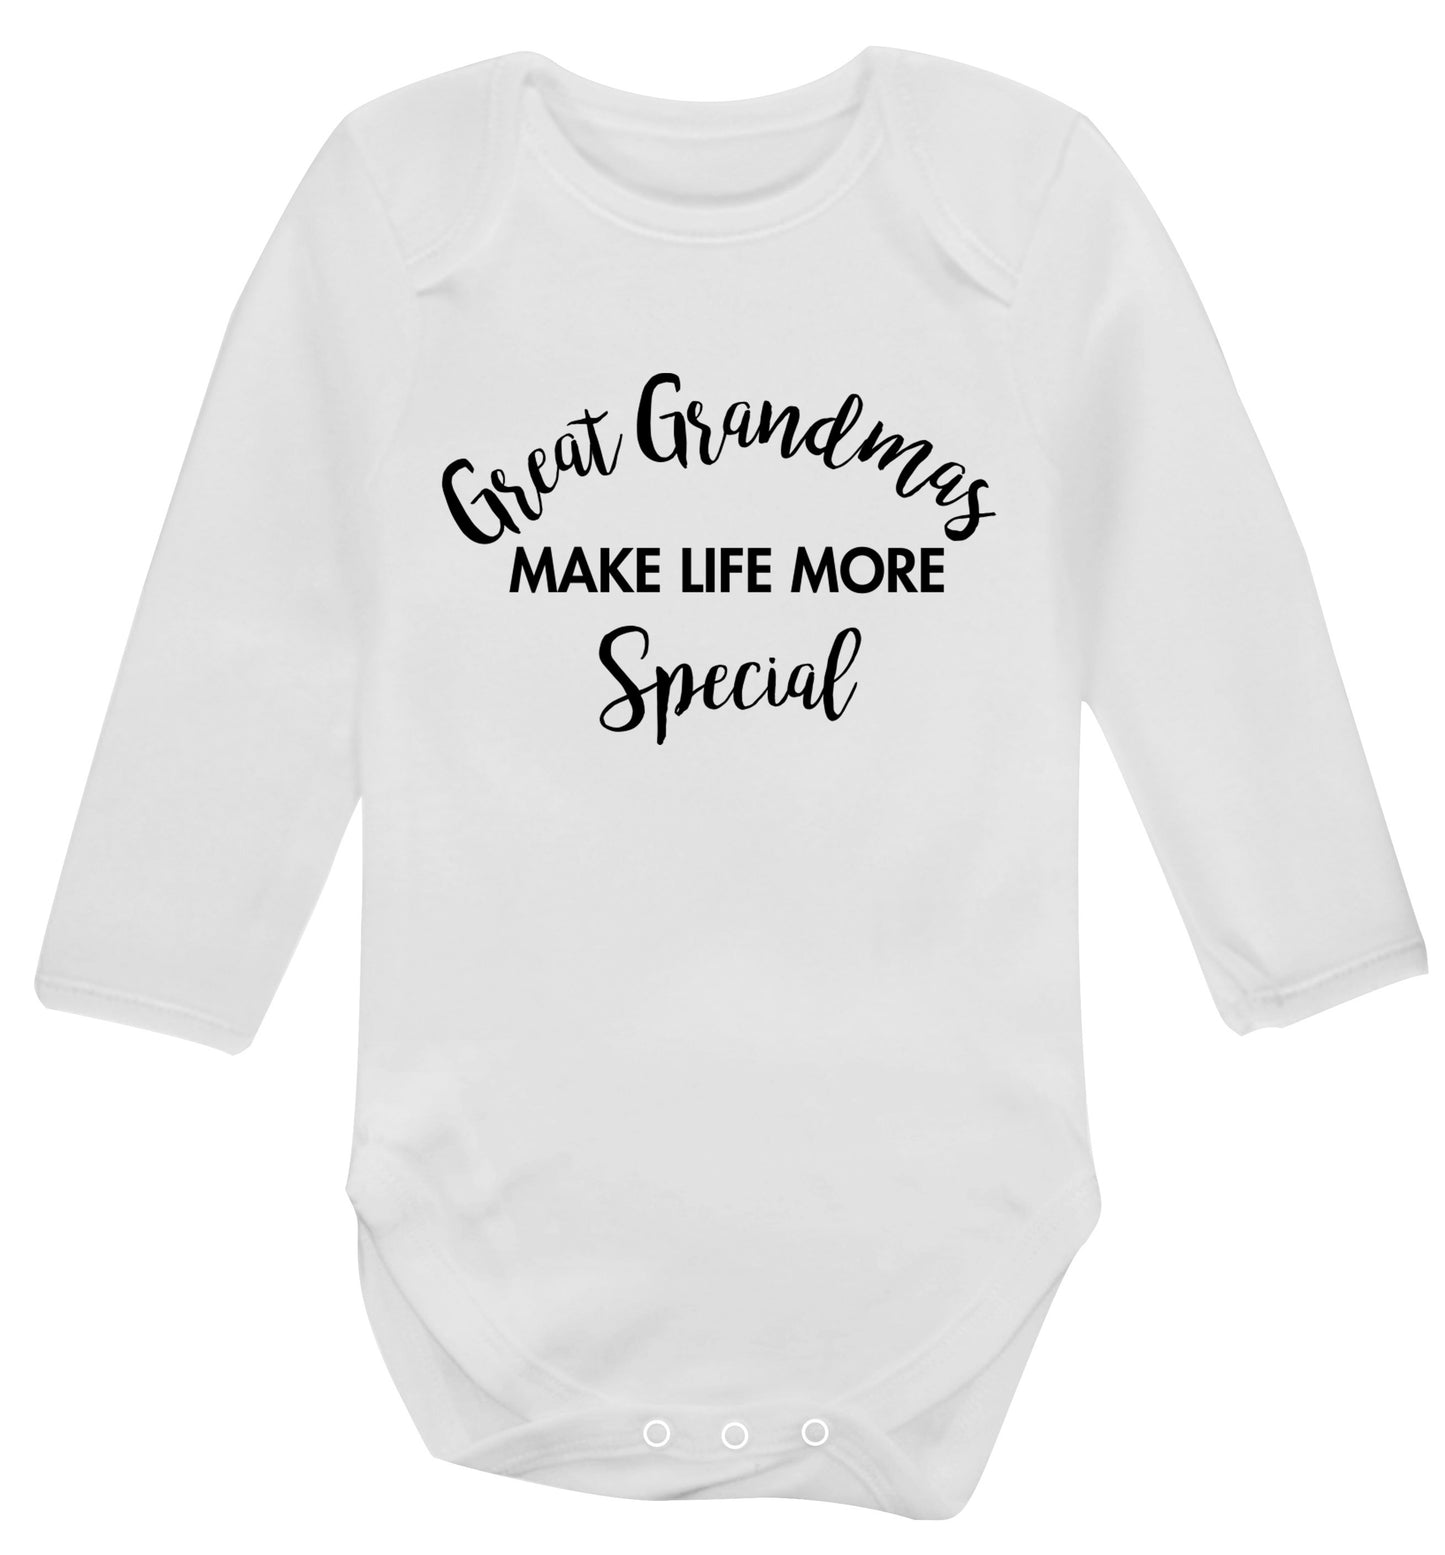 Great Grandmas make life more special Baby Vest long sleeved white 6-12 months